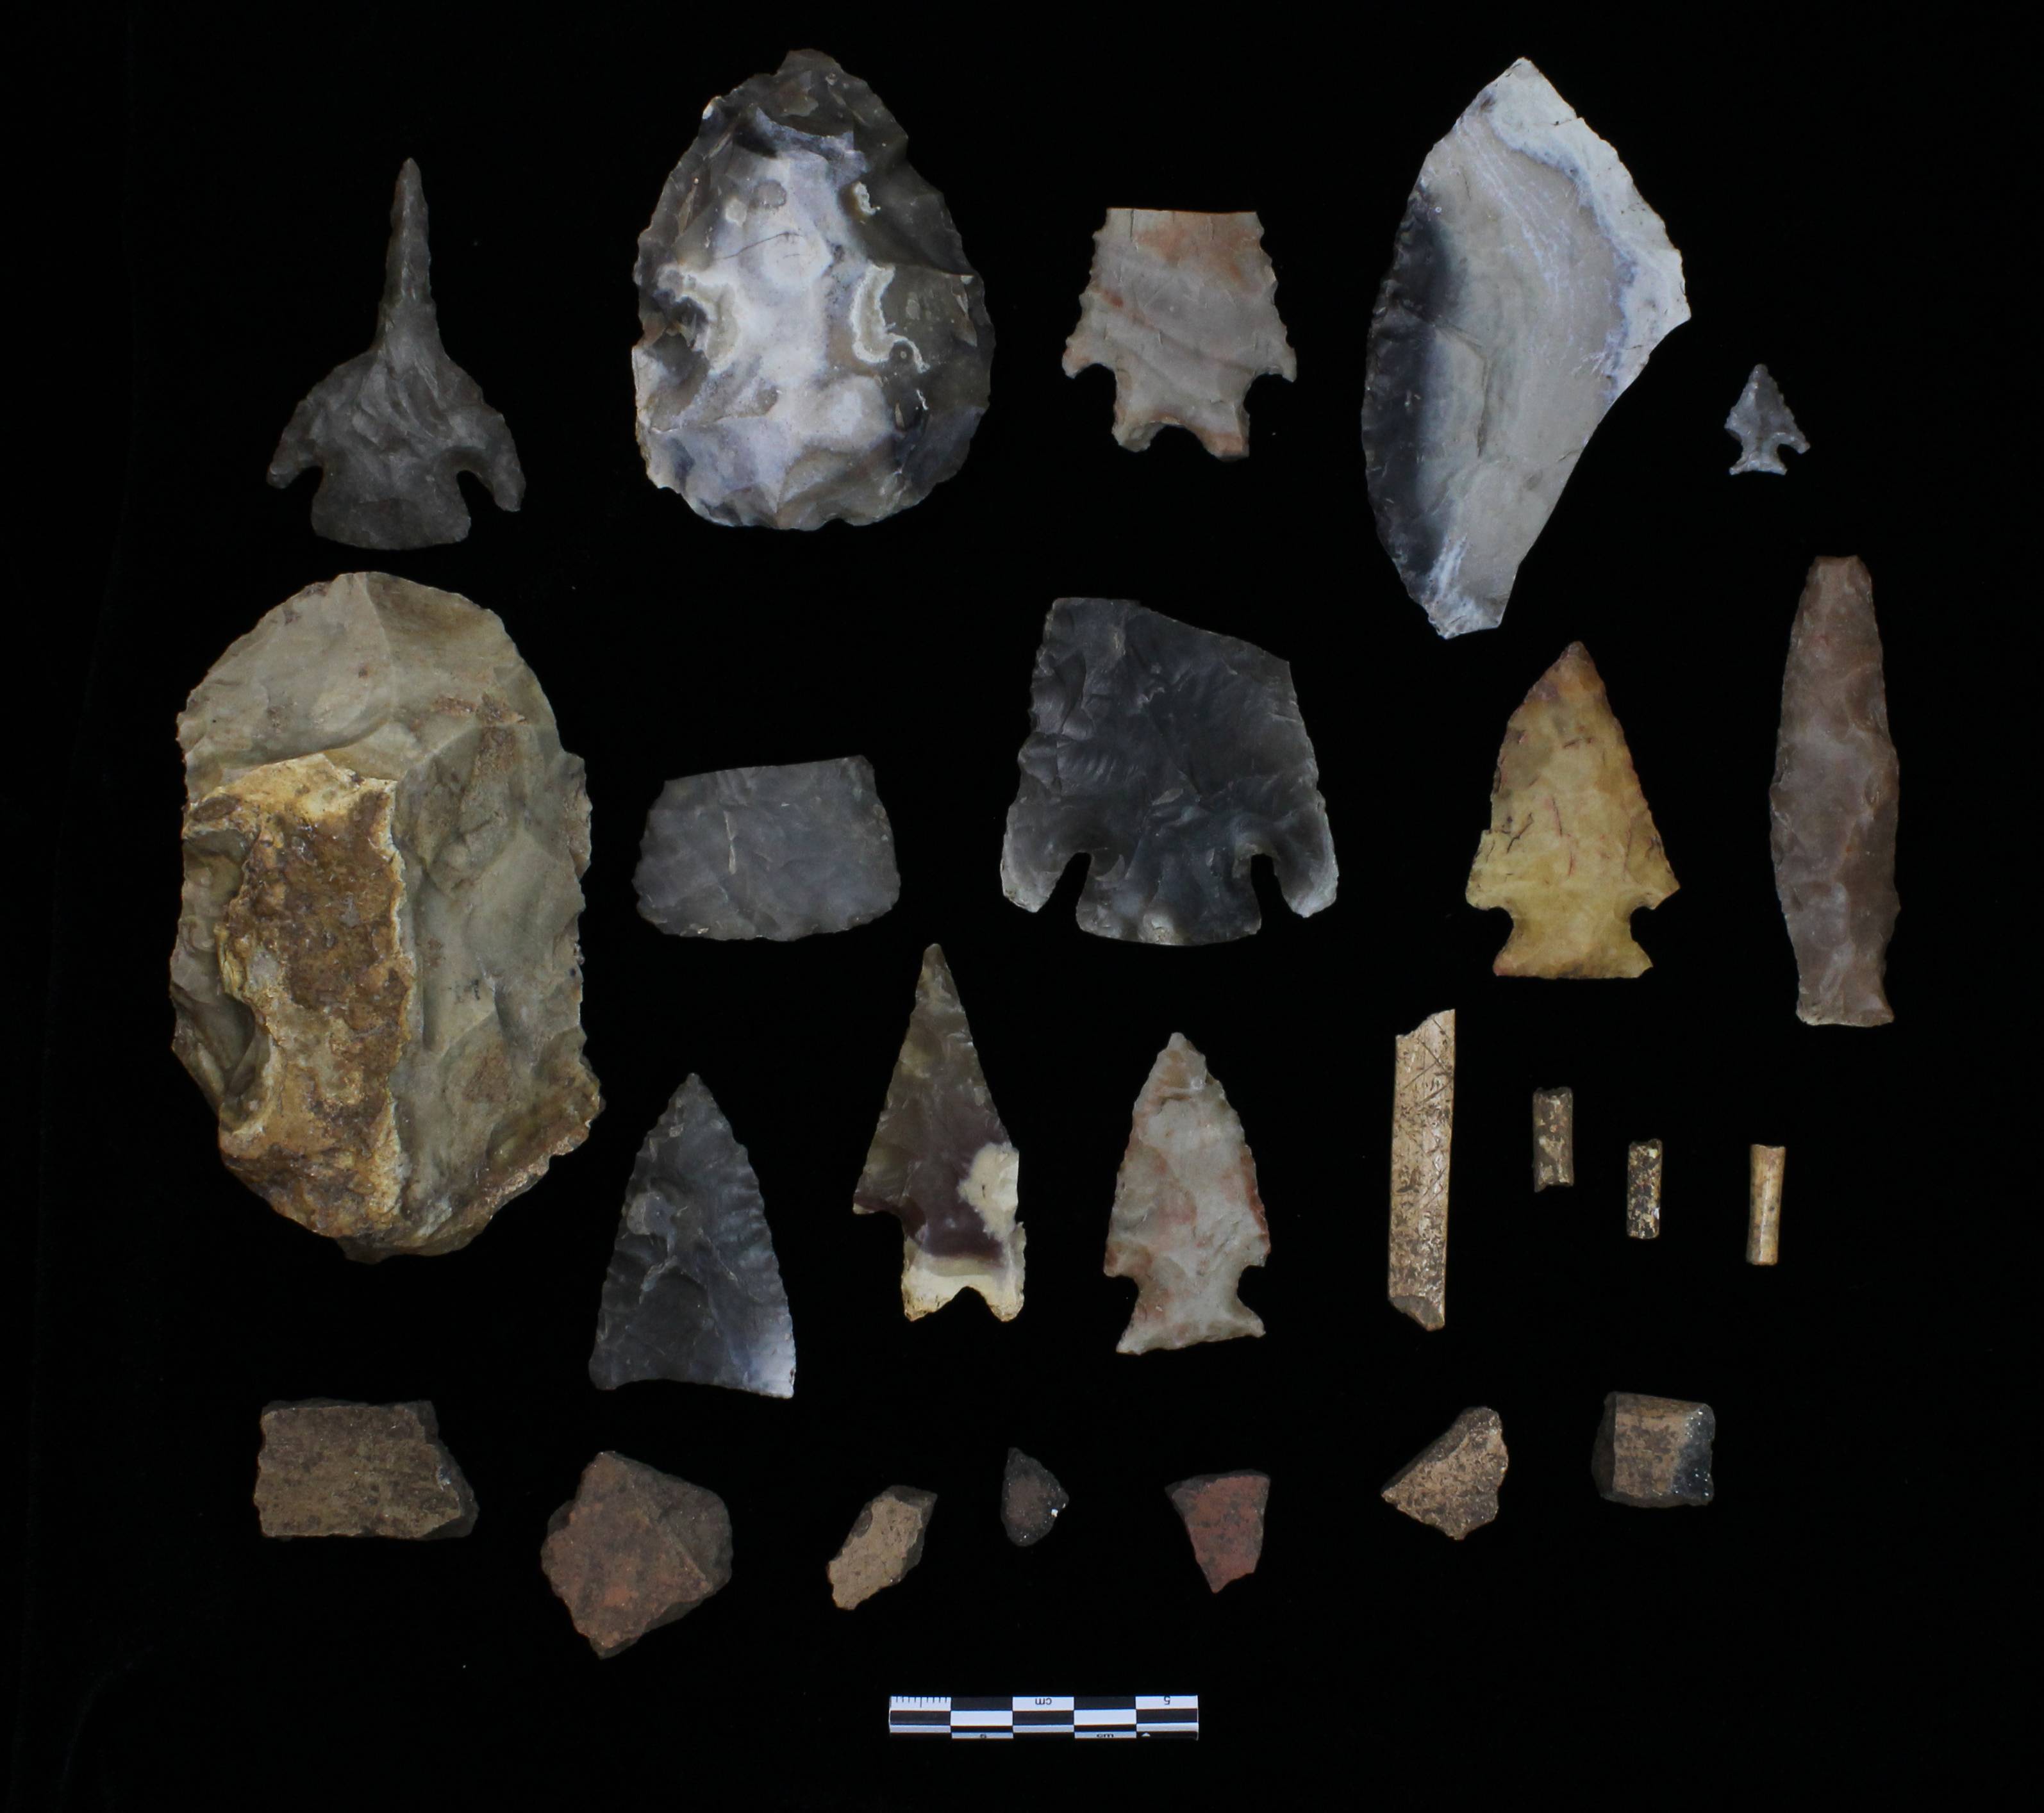 artifacts recovered by SLDR